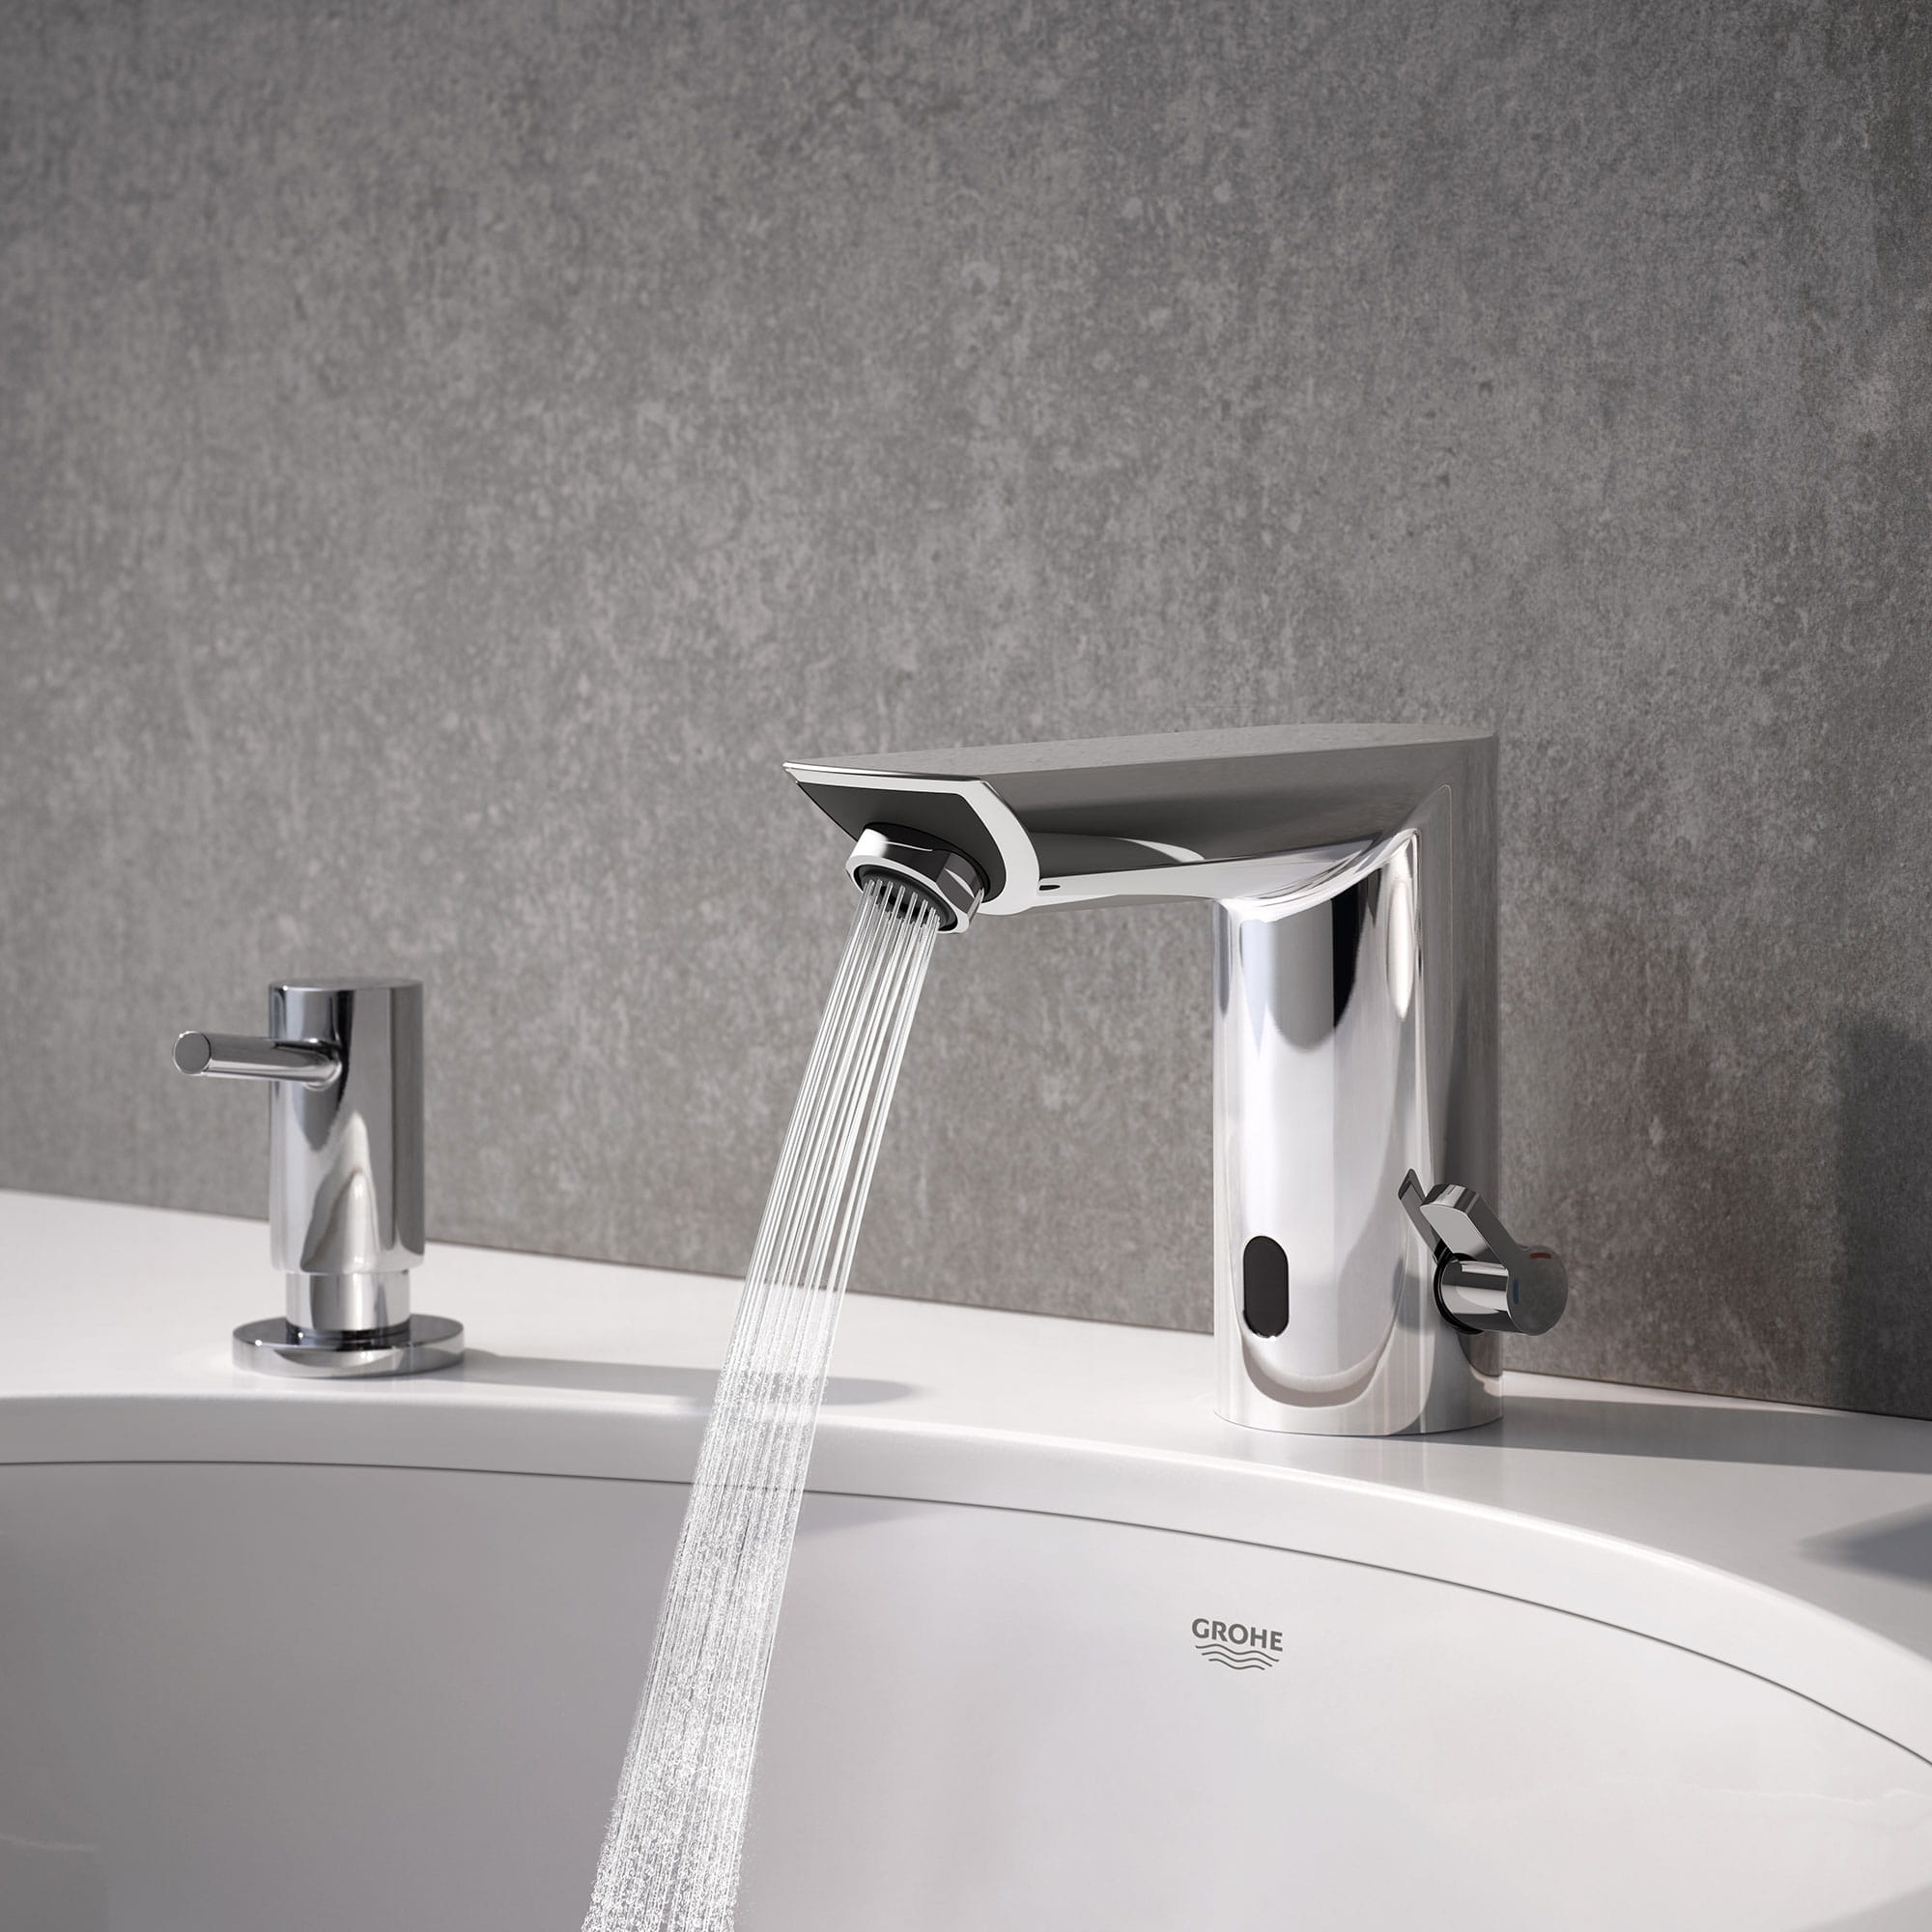 Touchless Faucet